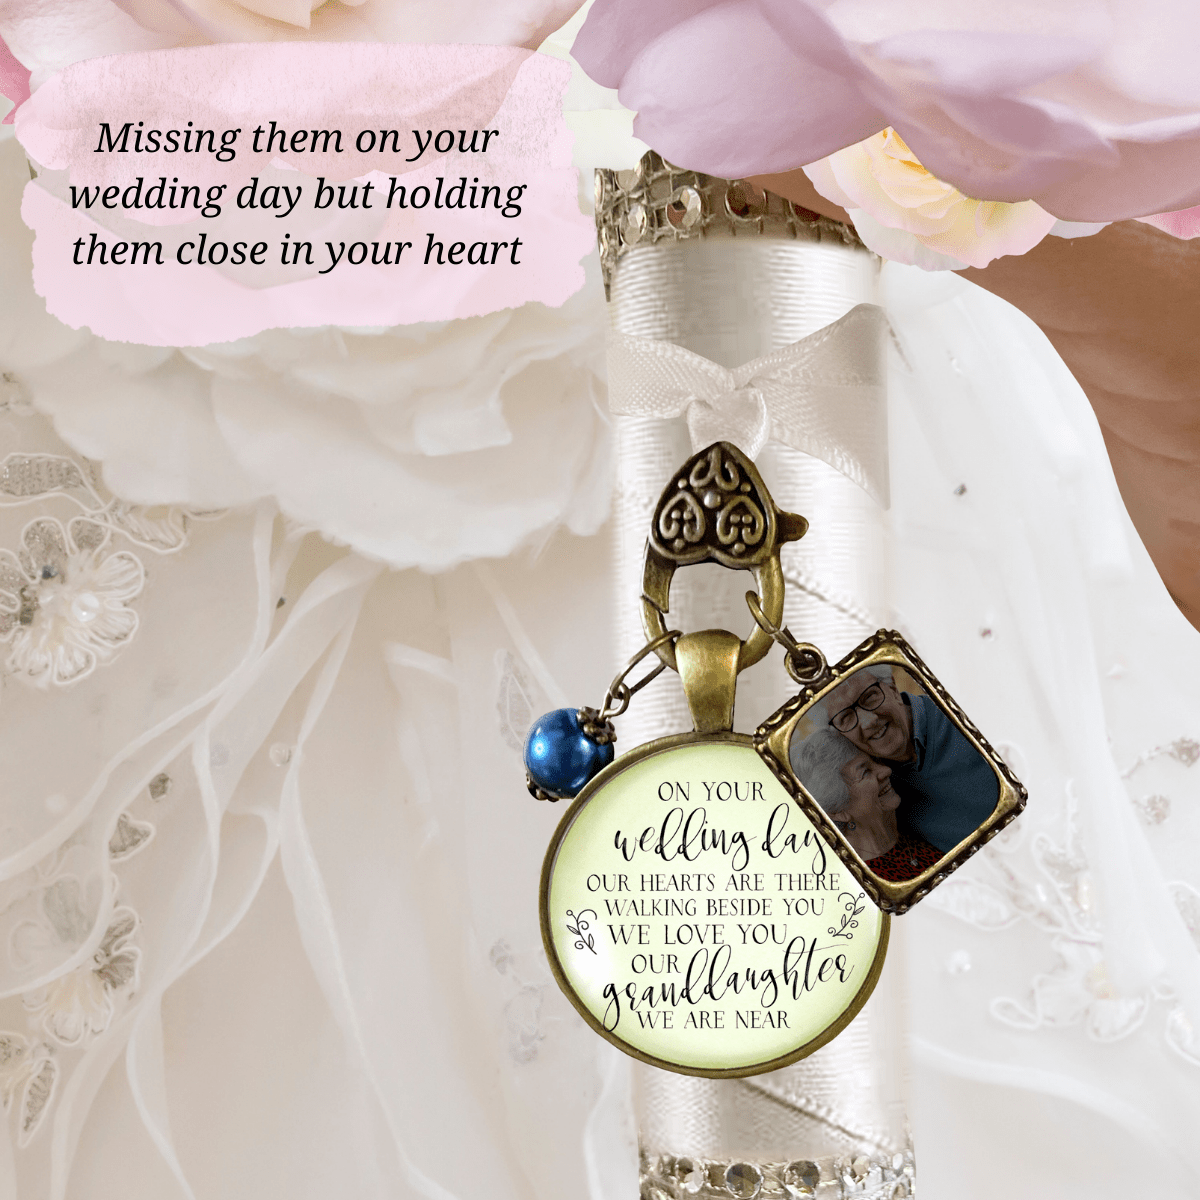 On Your Wedding Day OUR Heart Is There Walking Beside You GRANDDAUGHTER - BRONZE - CREAM - BLUE BEAD